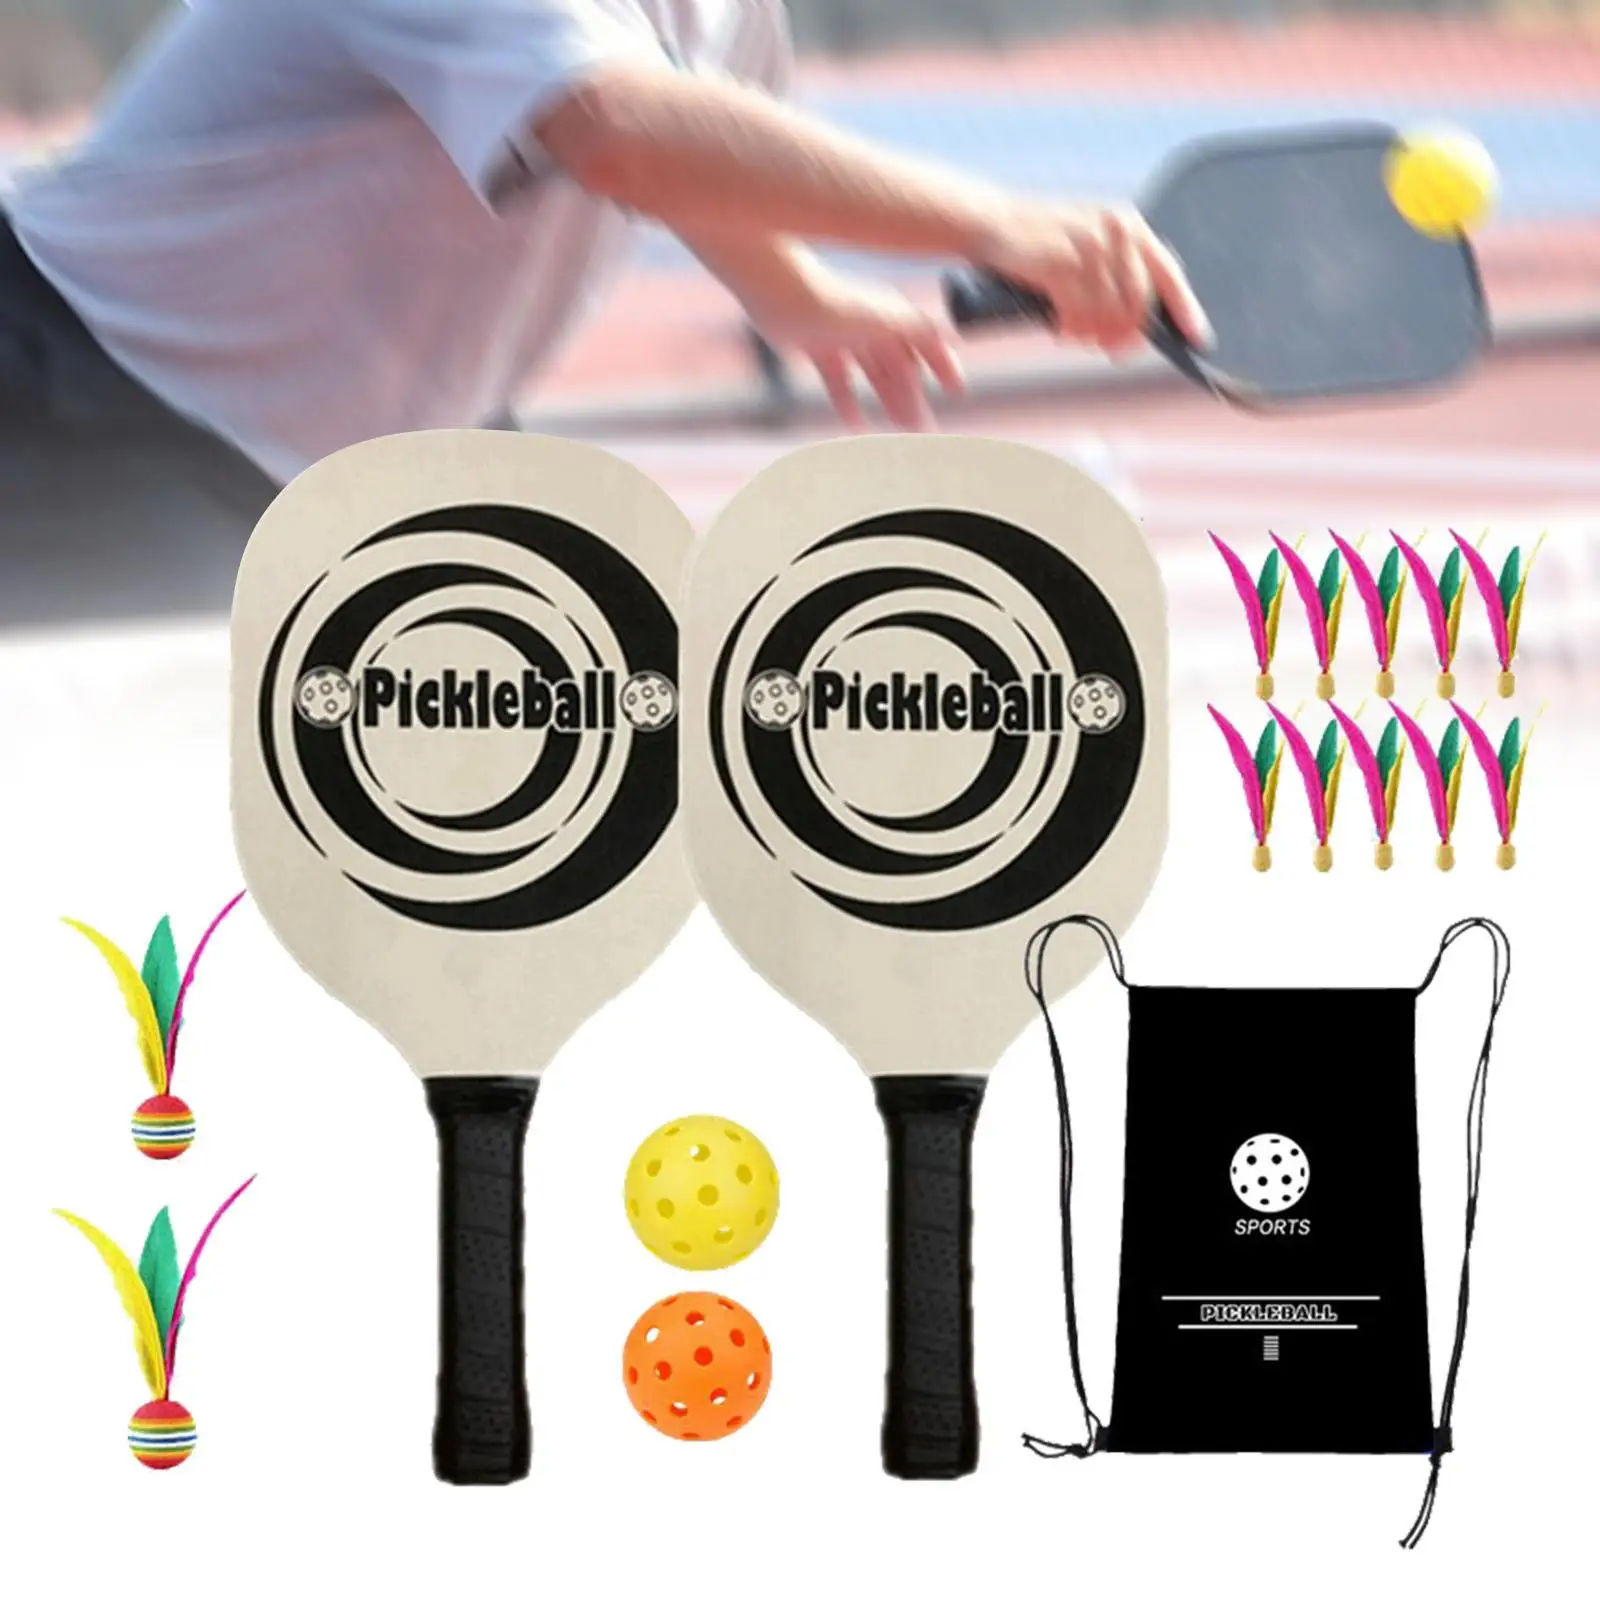 Pickleball Paddles Pickleball Racquets Carrying Bag Pickleball Rackets with 2